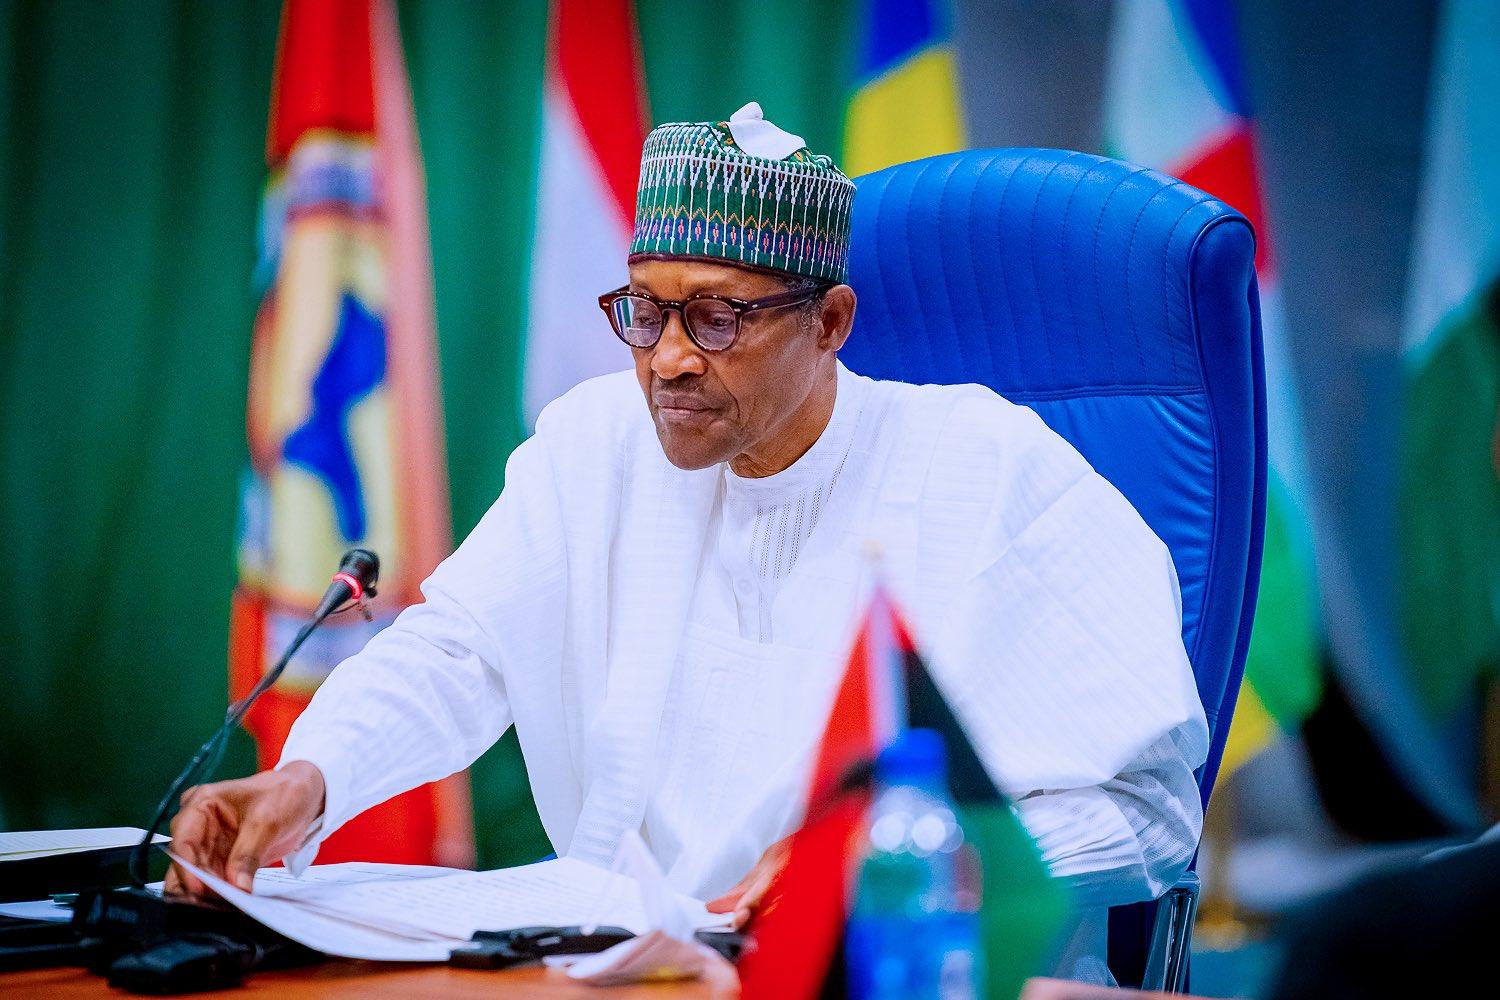 FG Will Honour Agreements With ASUU, Buhari Assures Nigerians